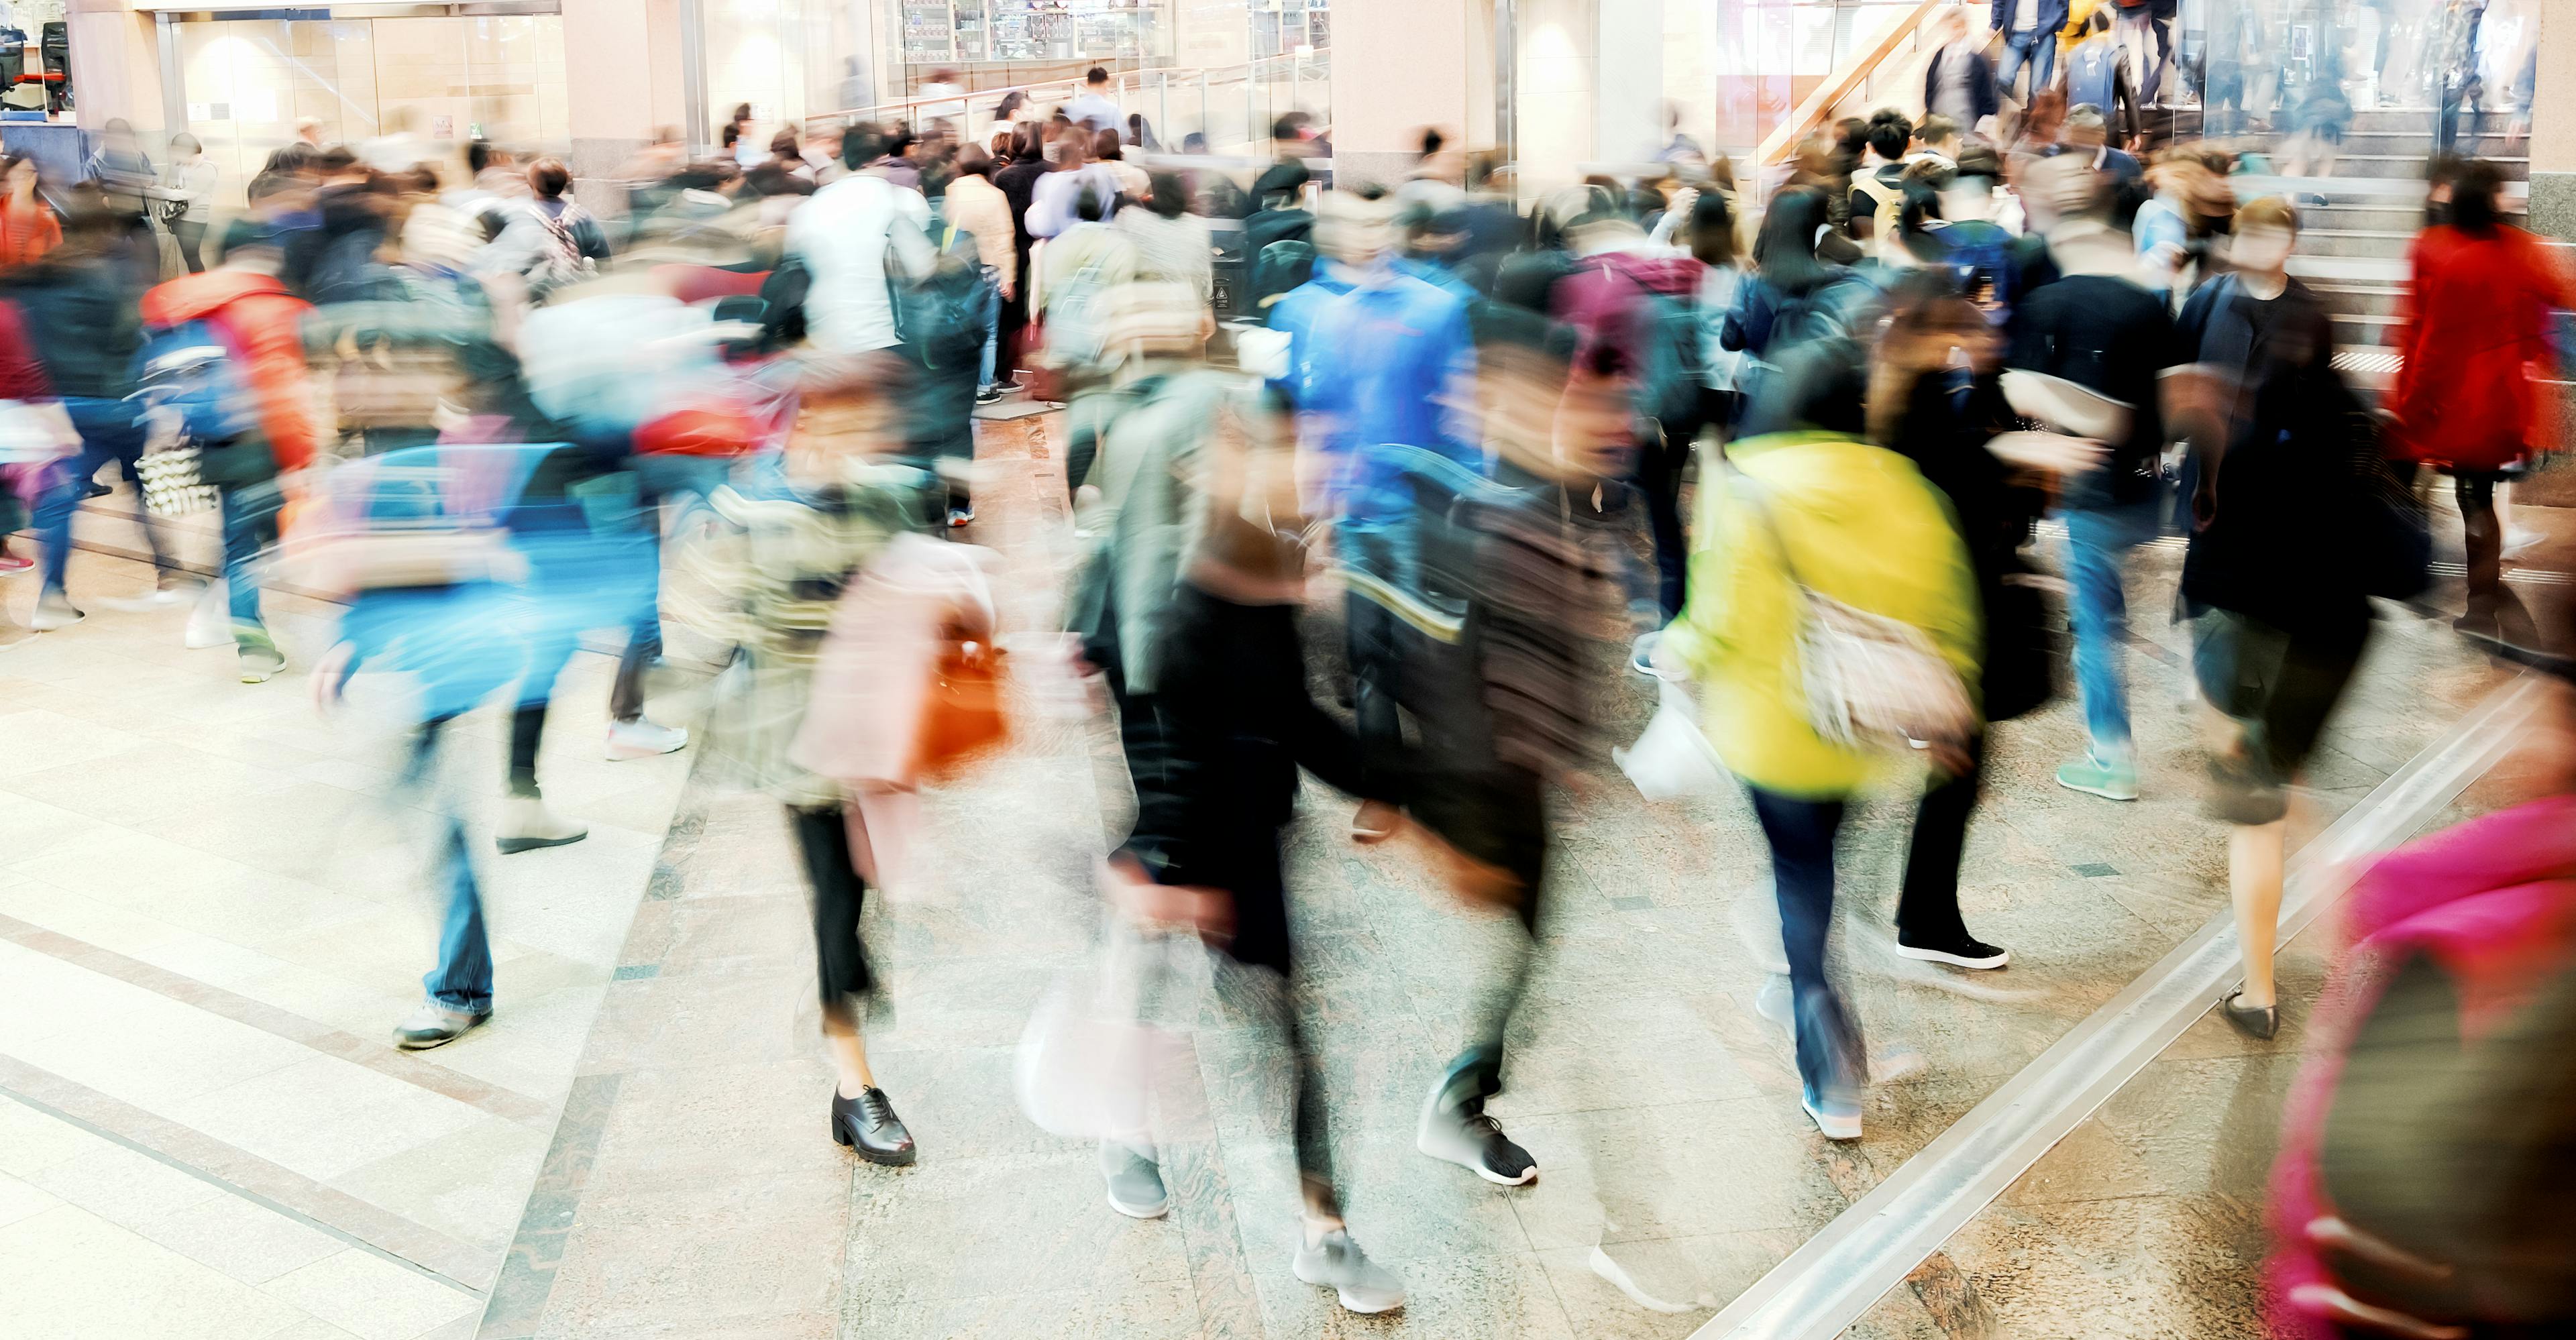 Blurred image of shoppers in mall